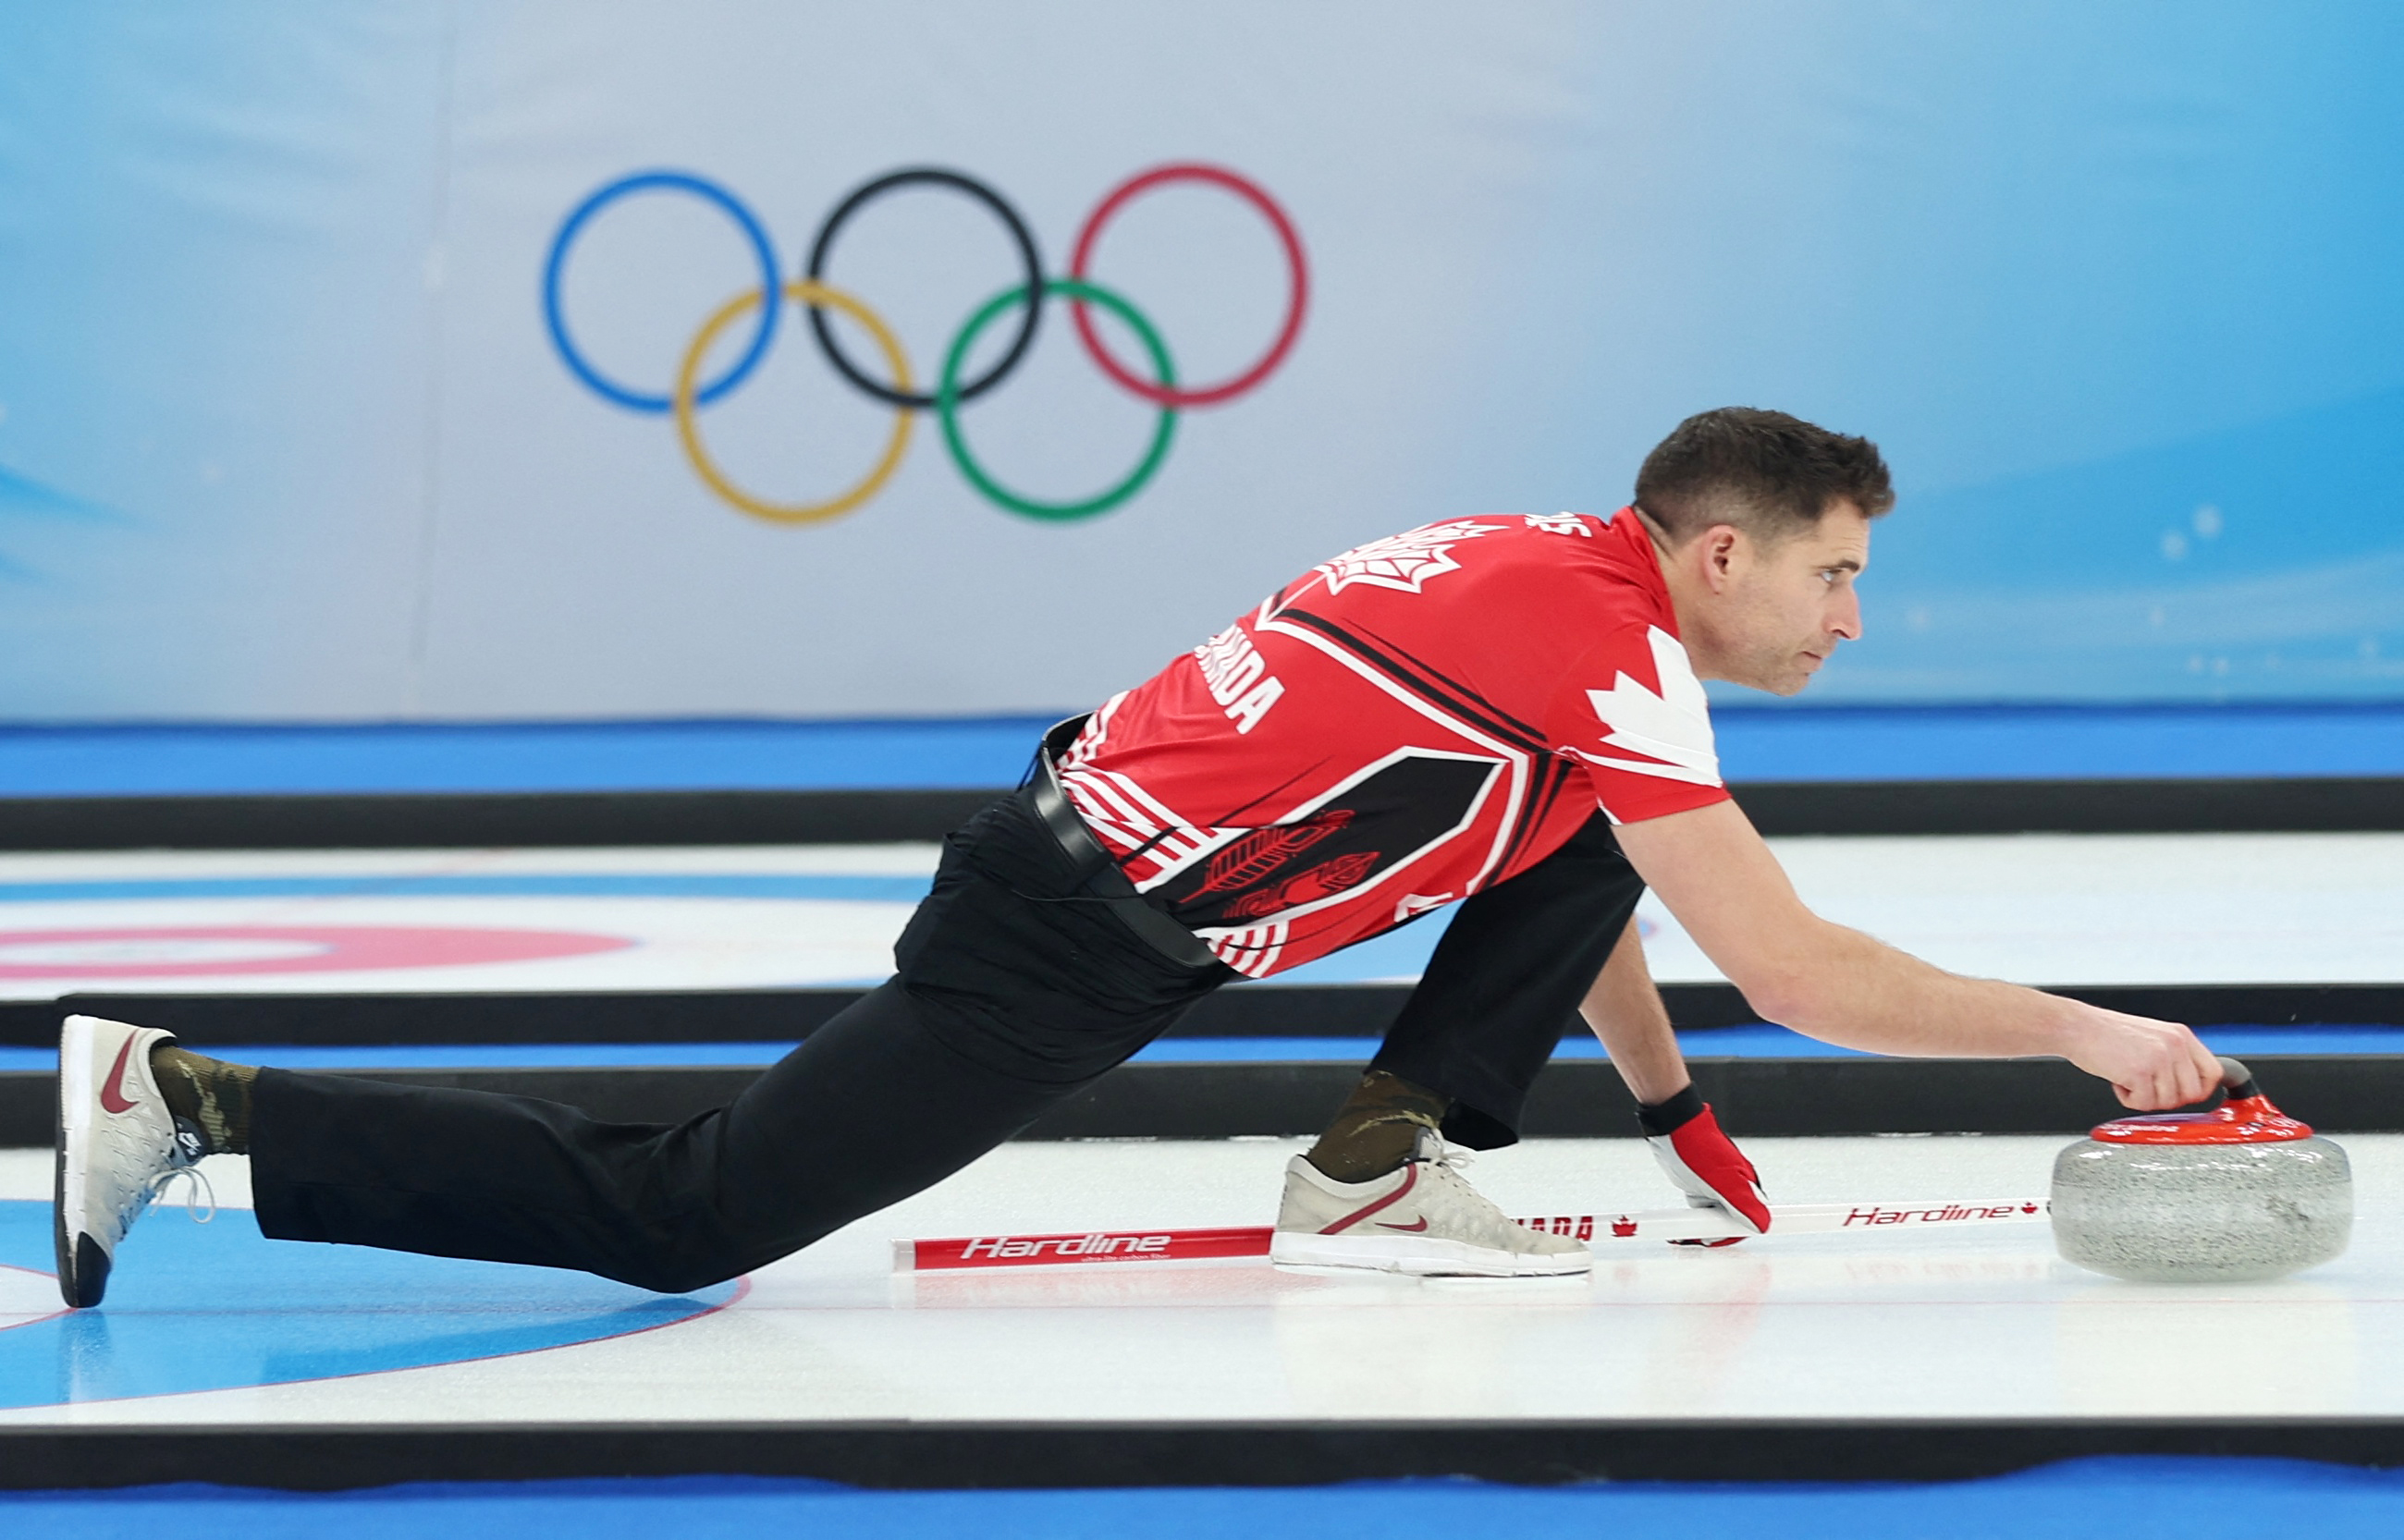 Curling-italy Secure First Ever Olympic Curling Medal, To Play Norway For Gold